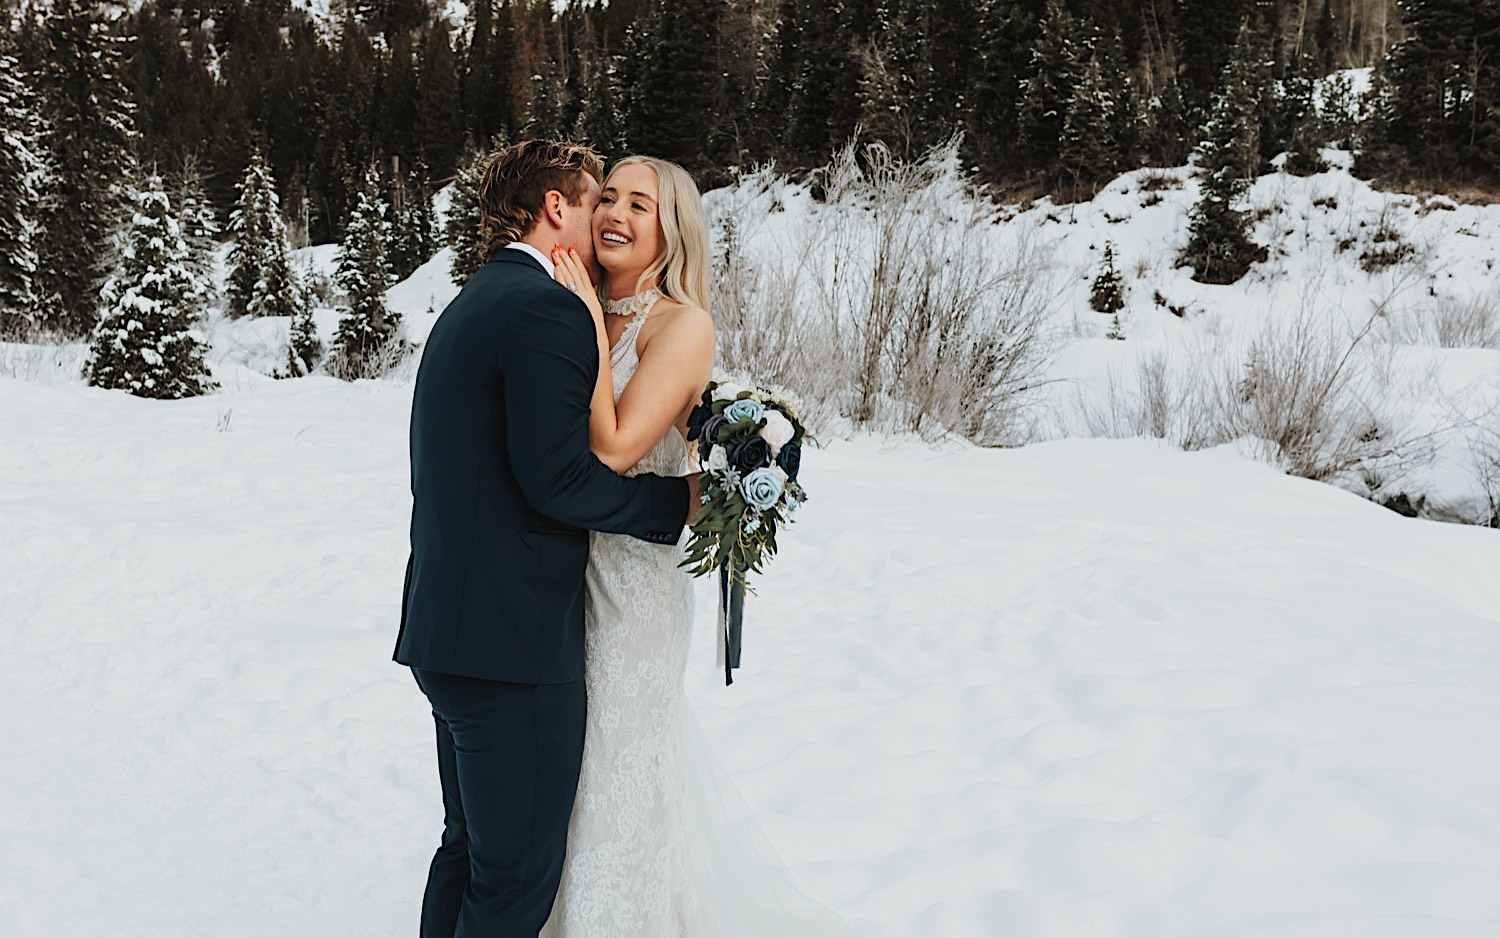 After their elopement, bride smiles as the groom kisses her on the cheek in a snow covered park near Salt Lake City